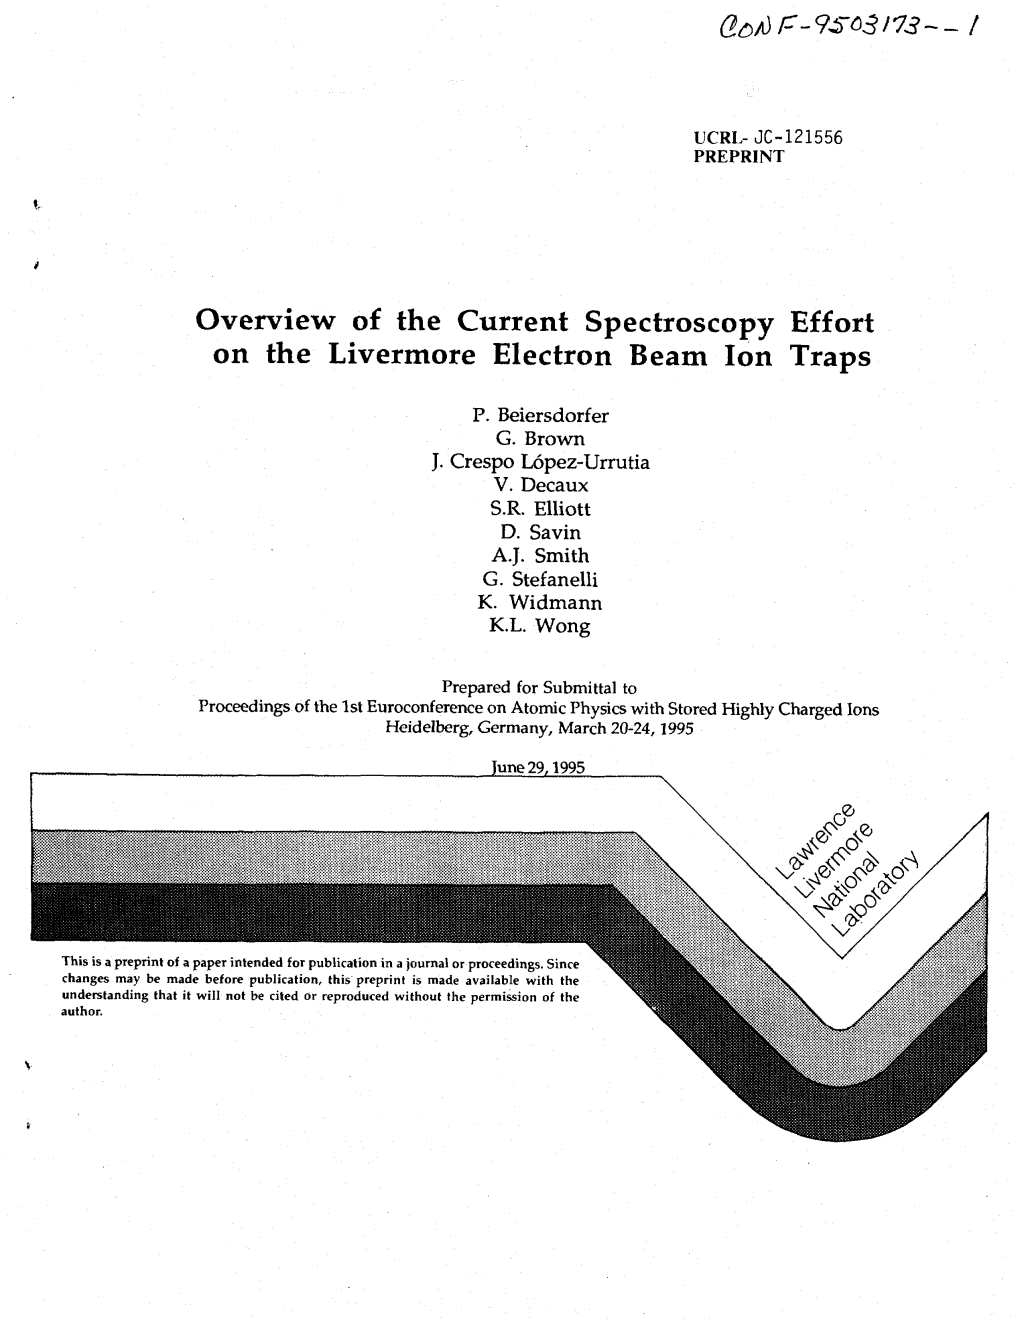 Overview of the Current Spectroscopy Effort on the Livermore Electron Beam Ion Traps